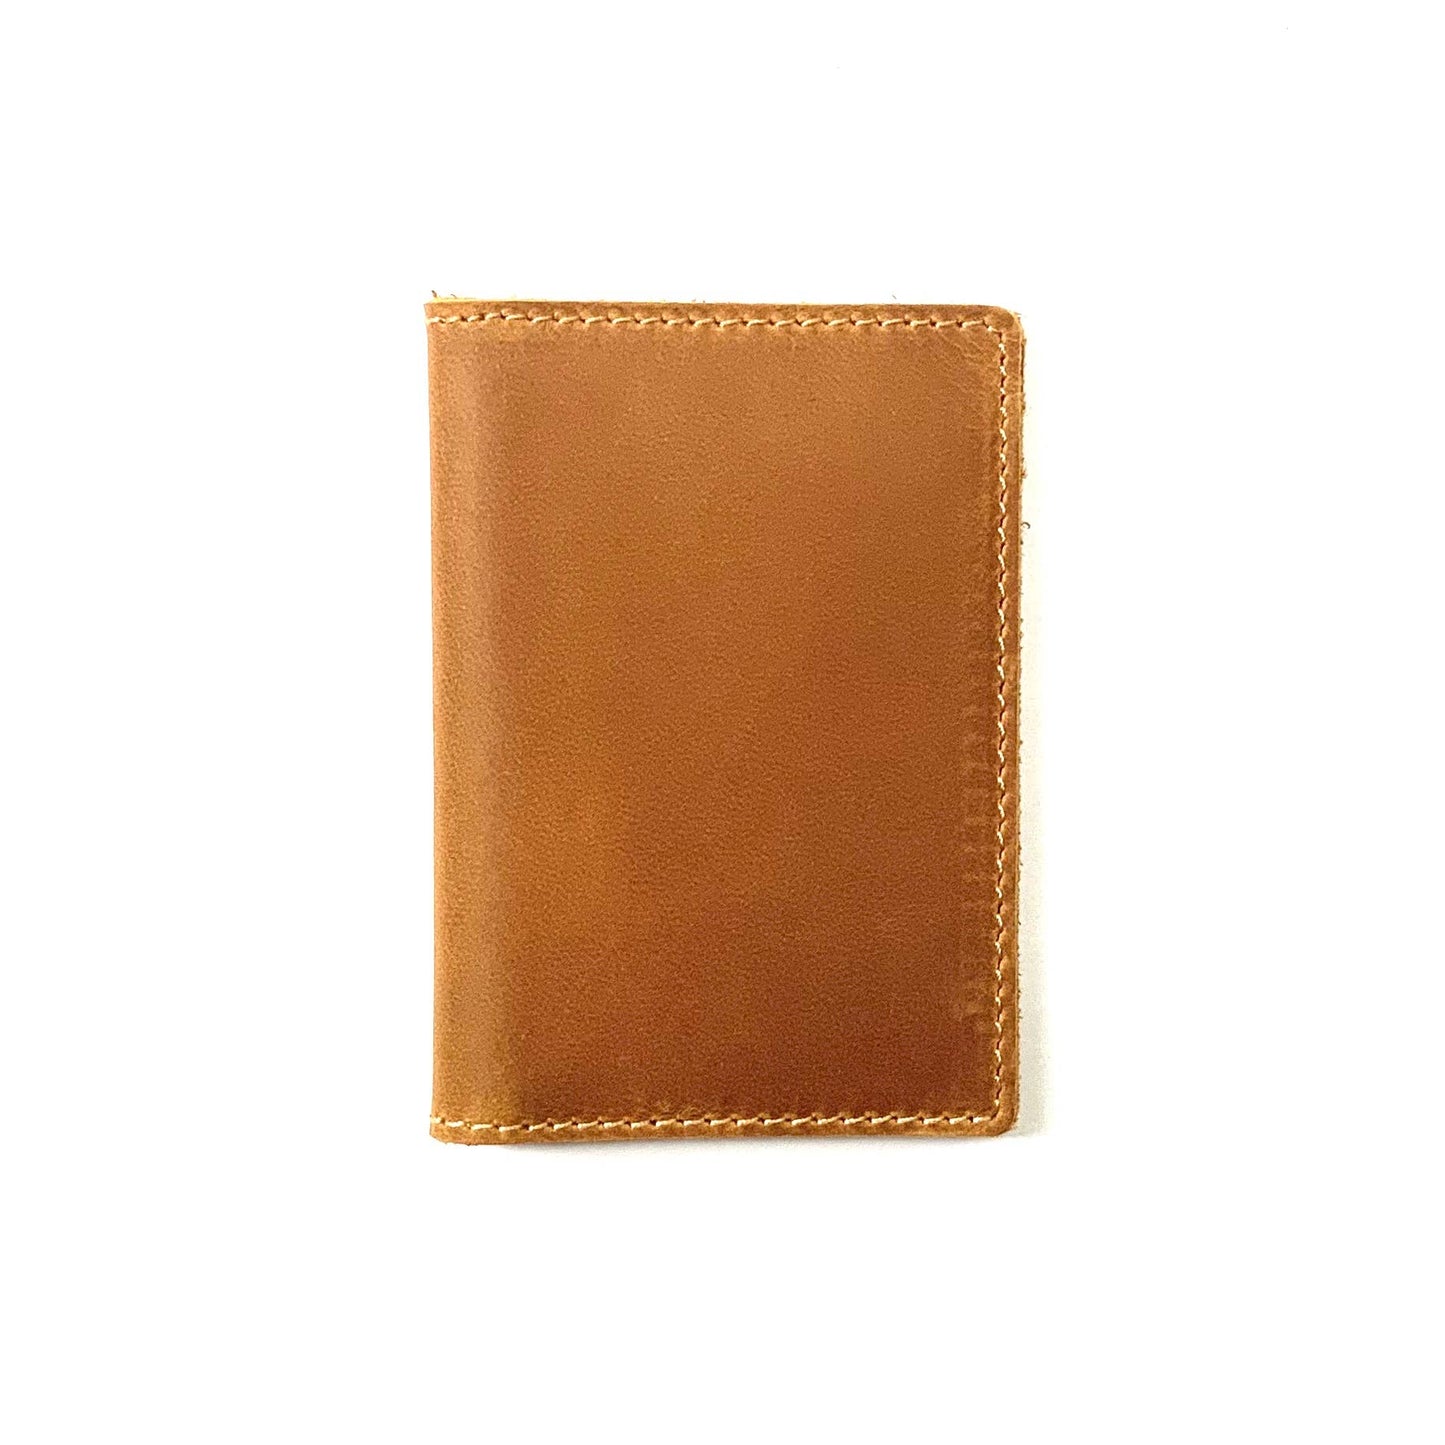 The Whiskey Wallet